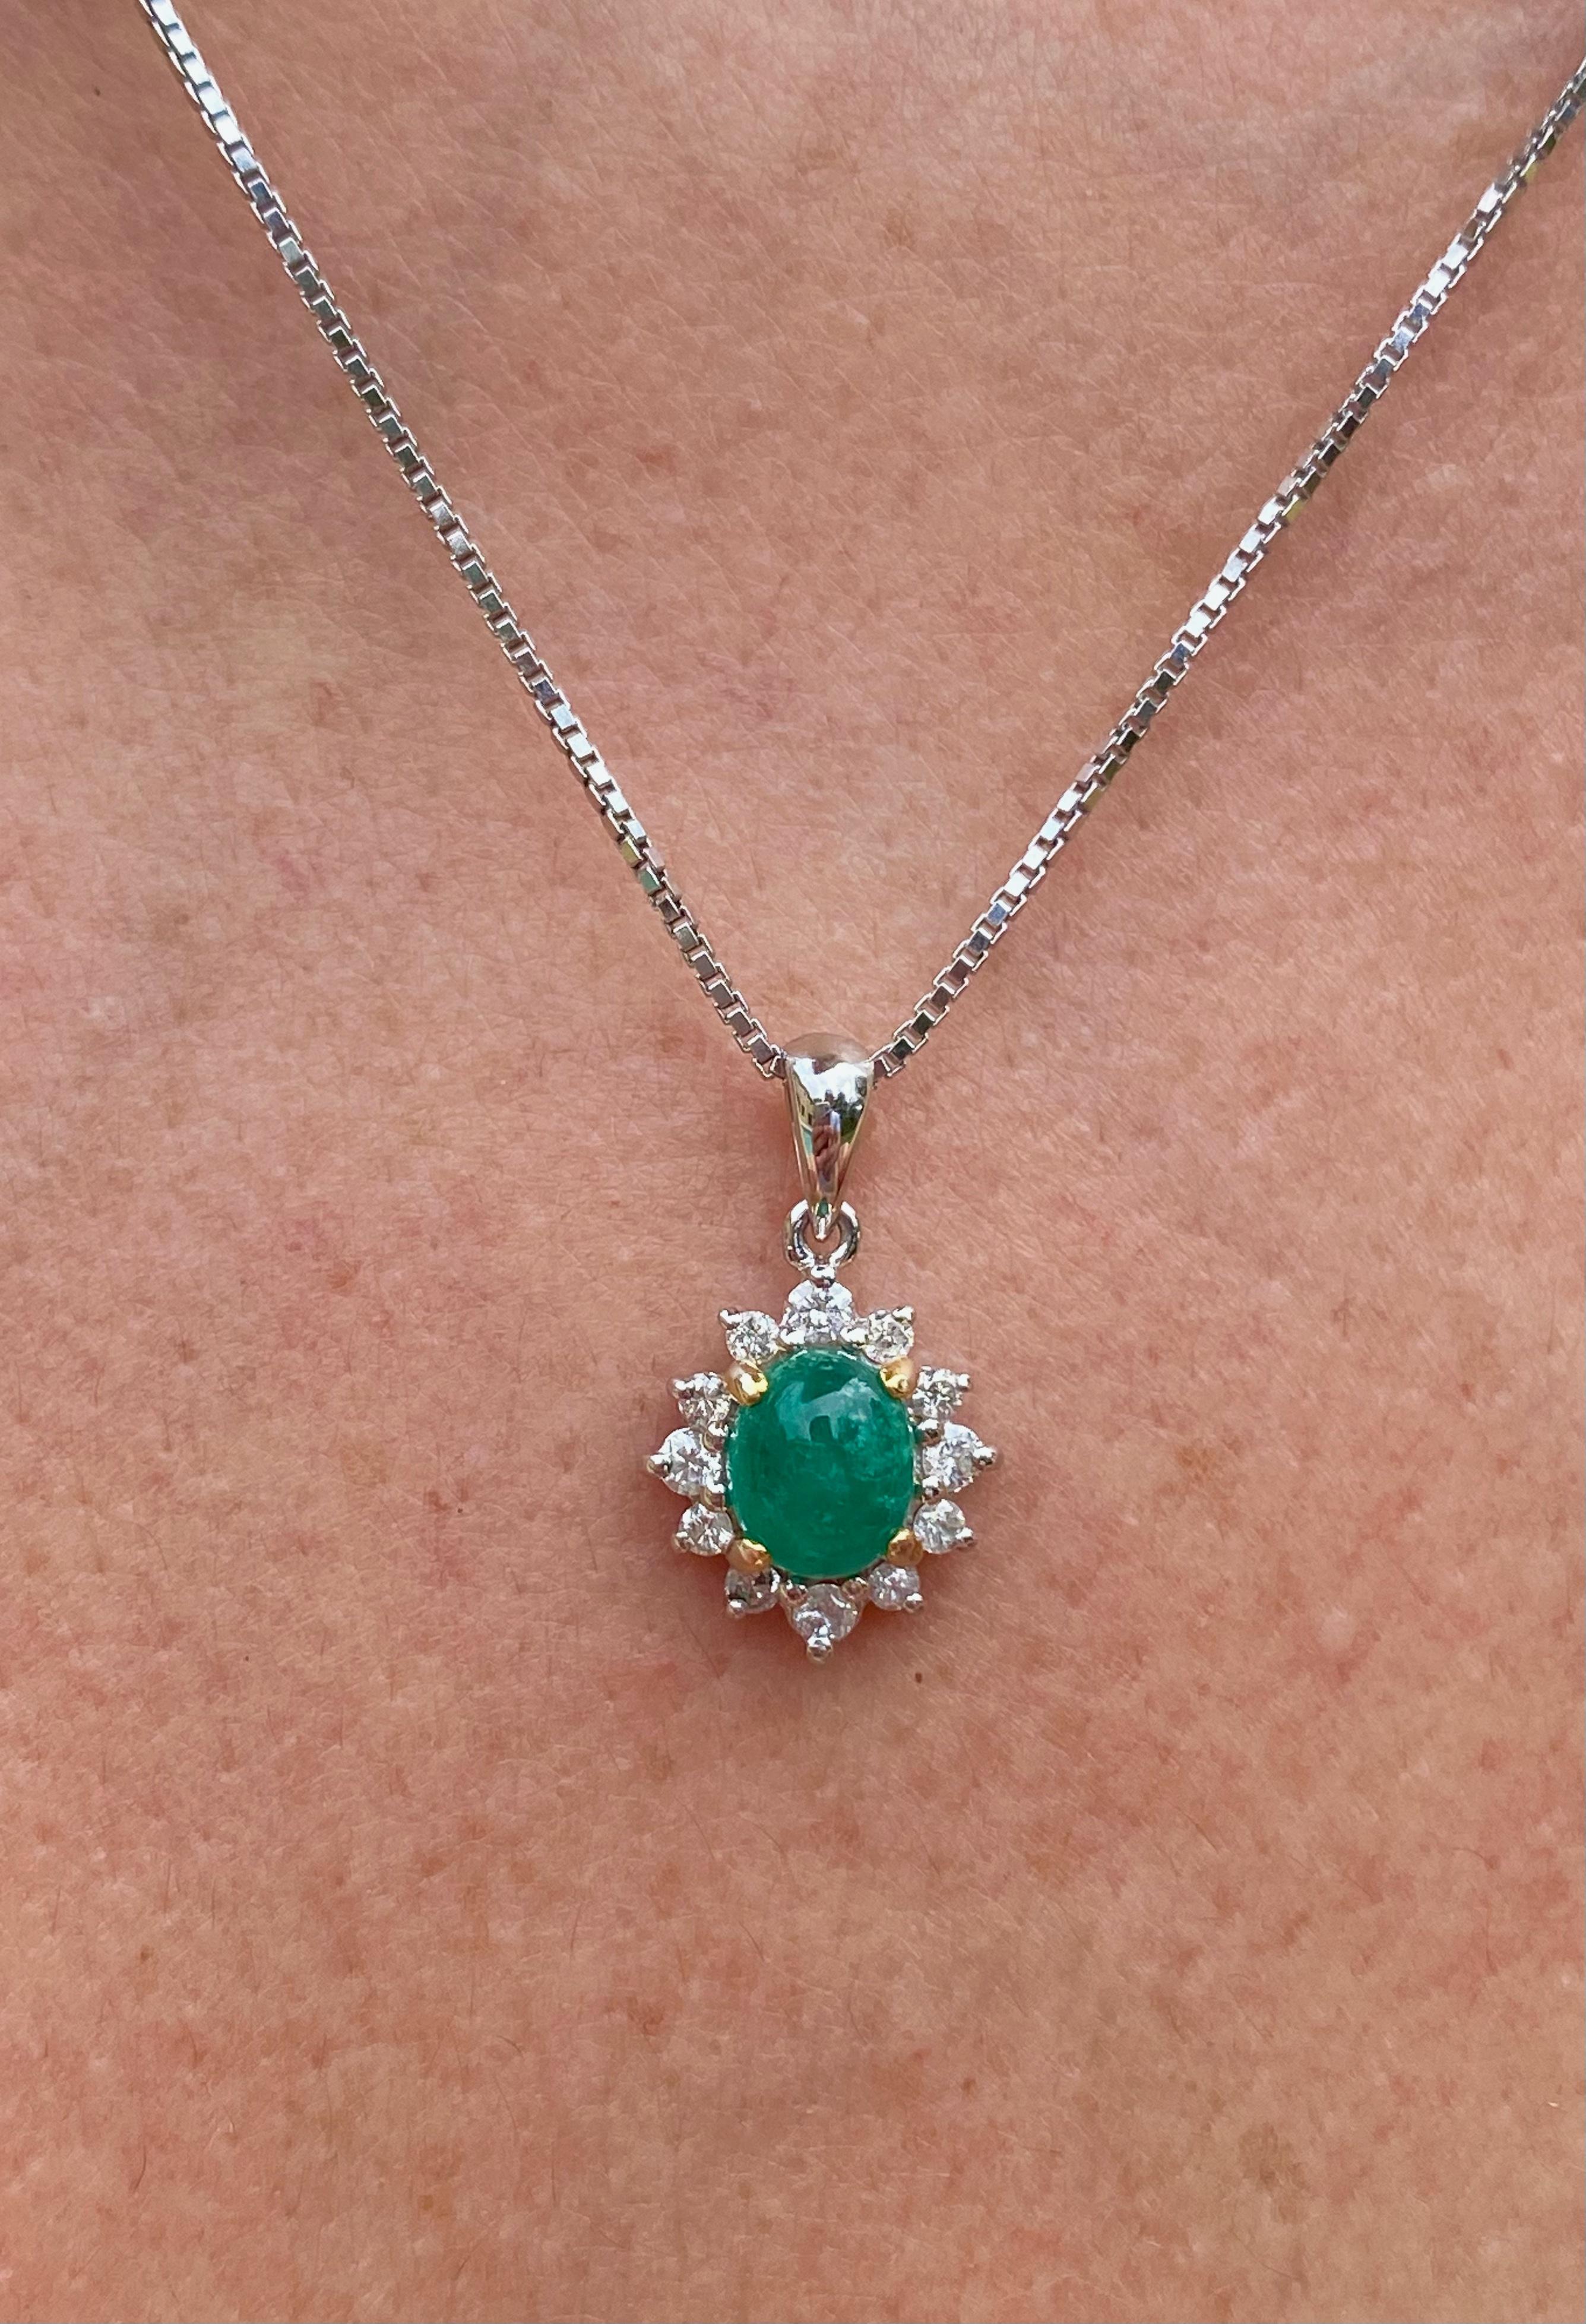 Centering a 0.74 Carat Oval-Cut Colombian Emerald, framed by 12 Round-Brilliant Cut Diamonds totaling 0.20 Carats, and set in 18K White Gold. 
Natural Emerald Pendant of Colombian origin. Cabochon-Cut center stone with a vibrant vivid green color